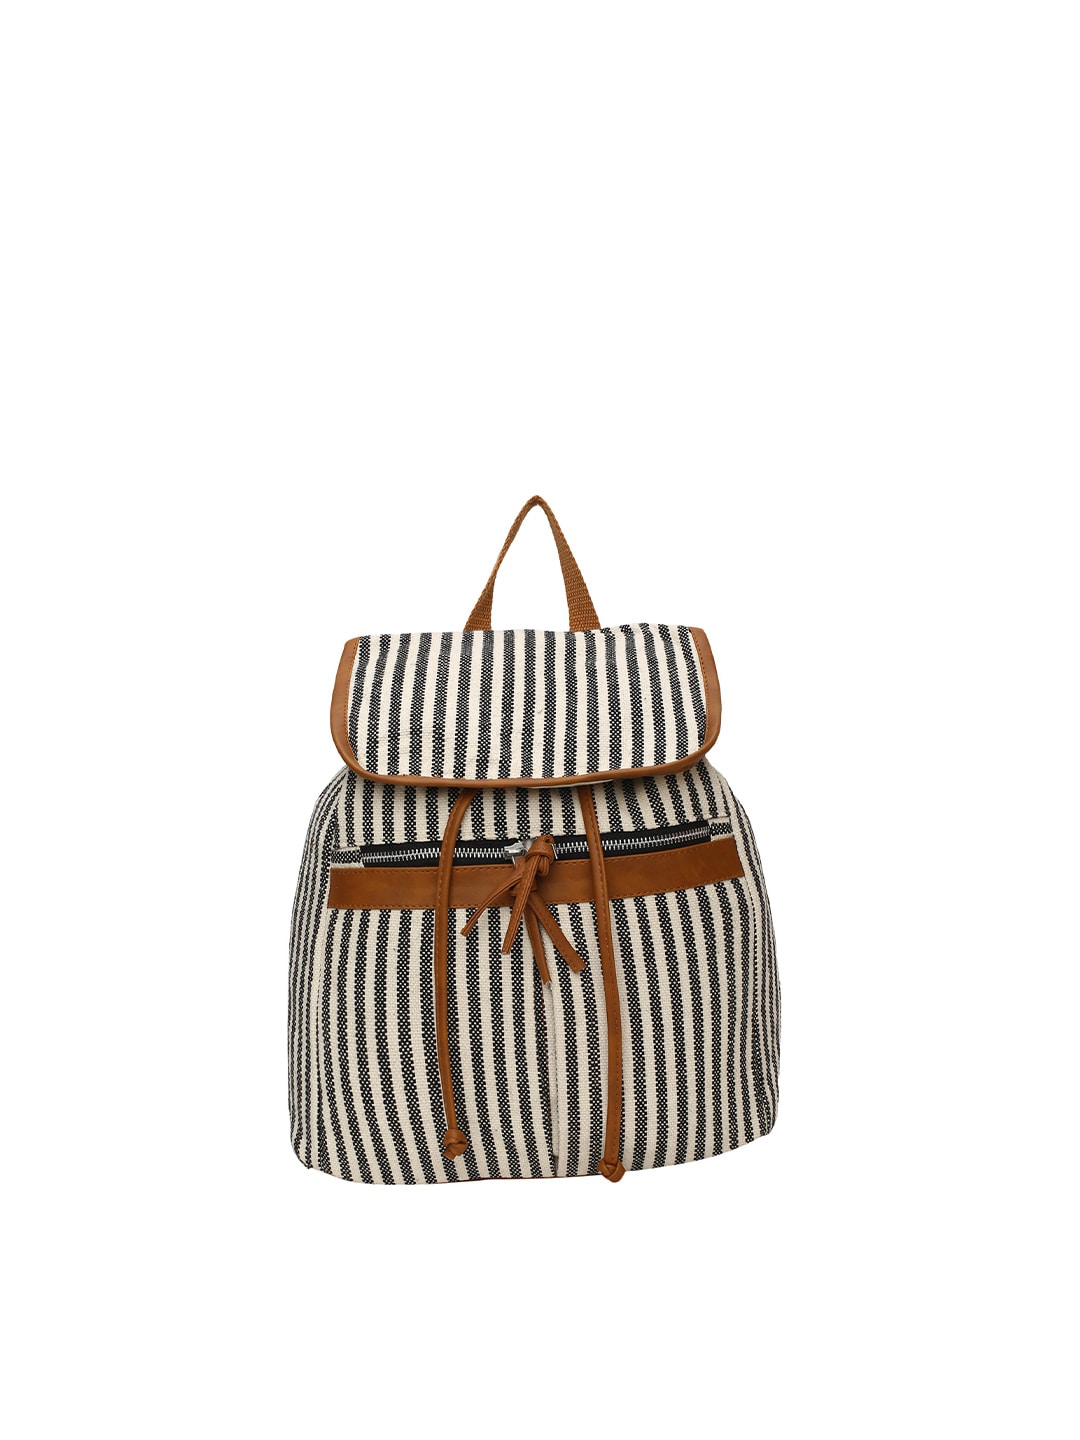 max Women Off White & Black Striped Backpack